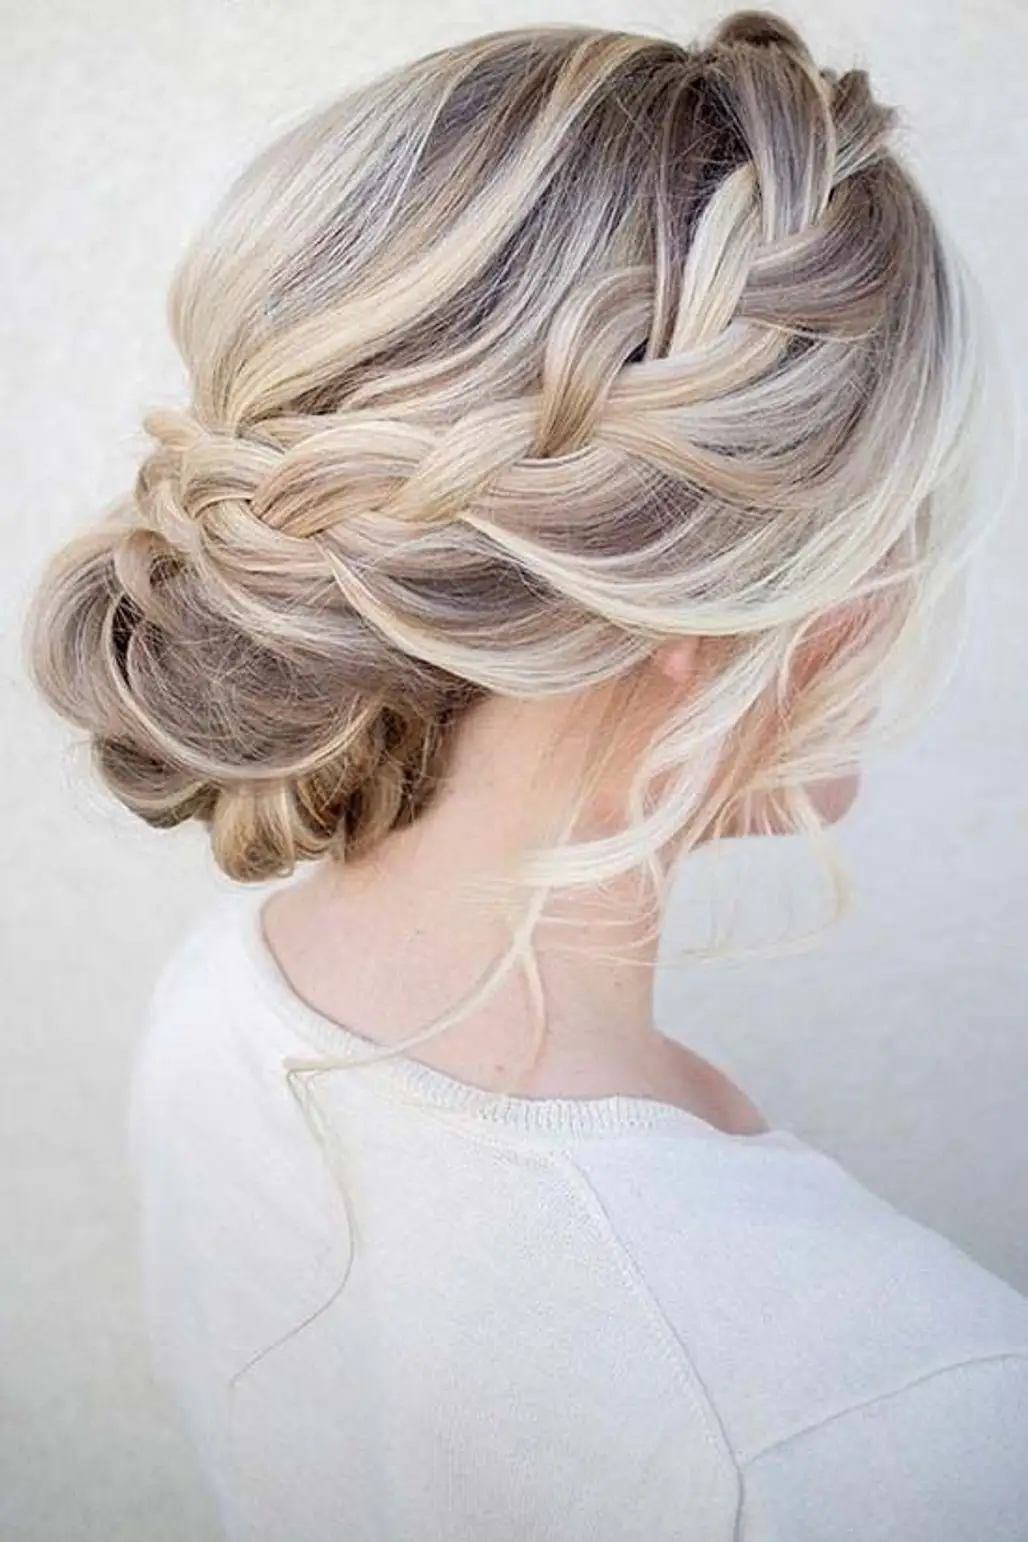 hair,hairstyle,face,bridal accessory,blond,